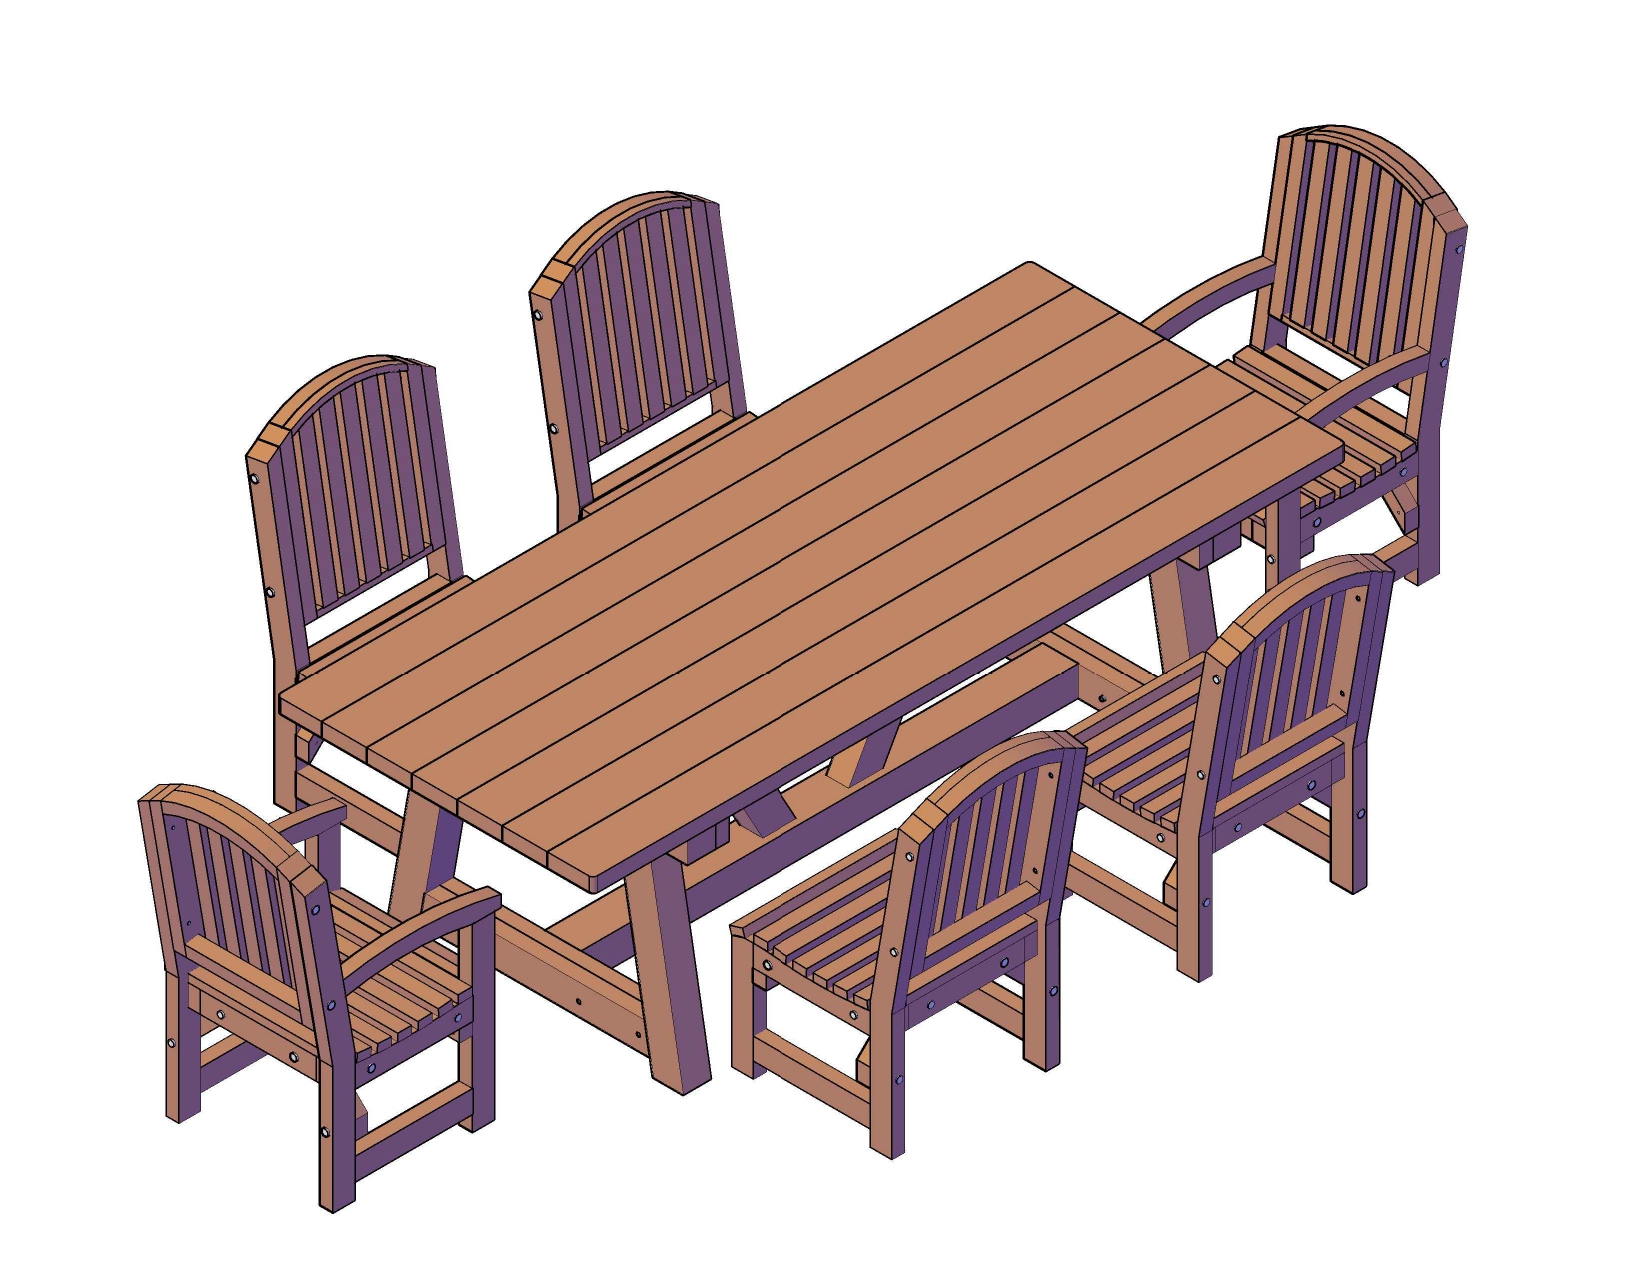 chairs_armless_armchairs_the_classic_redwood_patio_table_d_02.jpg